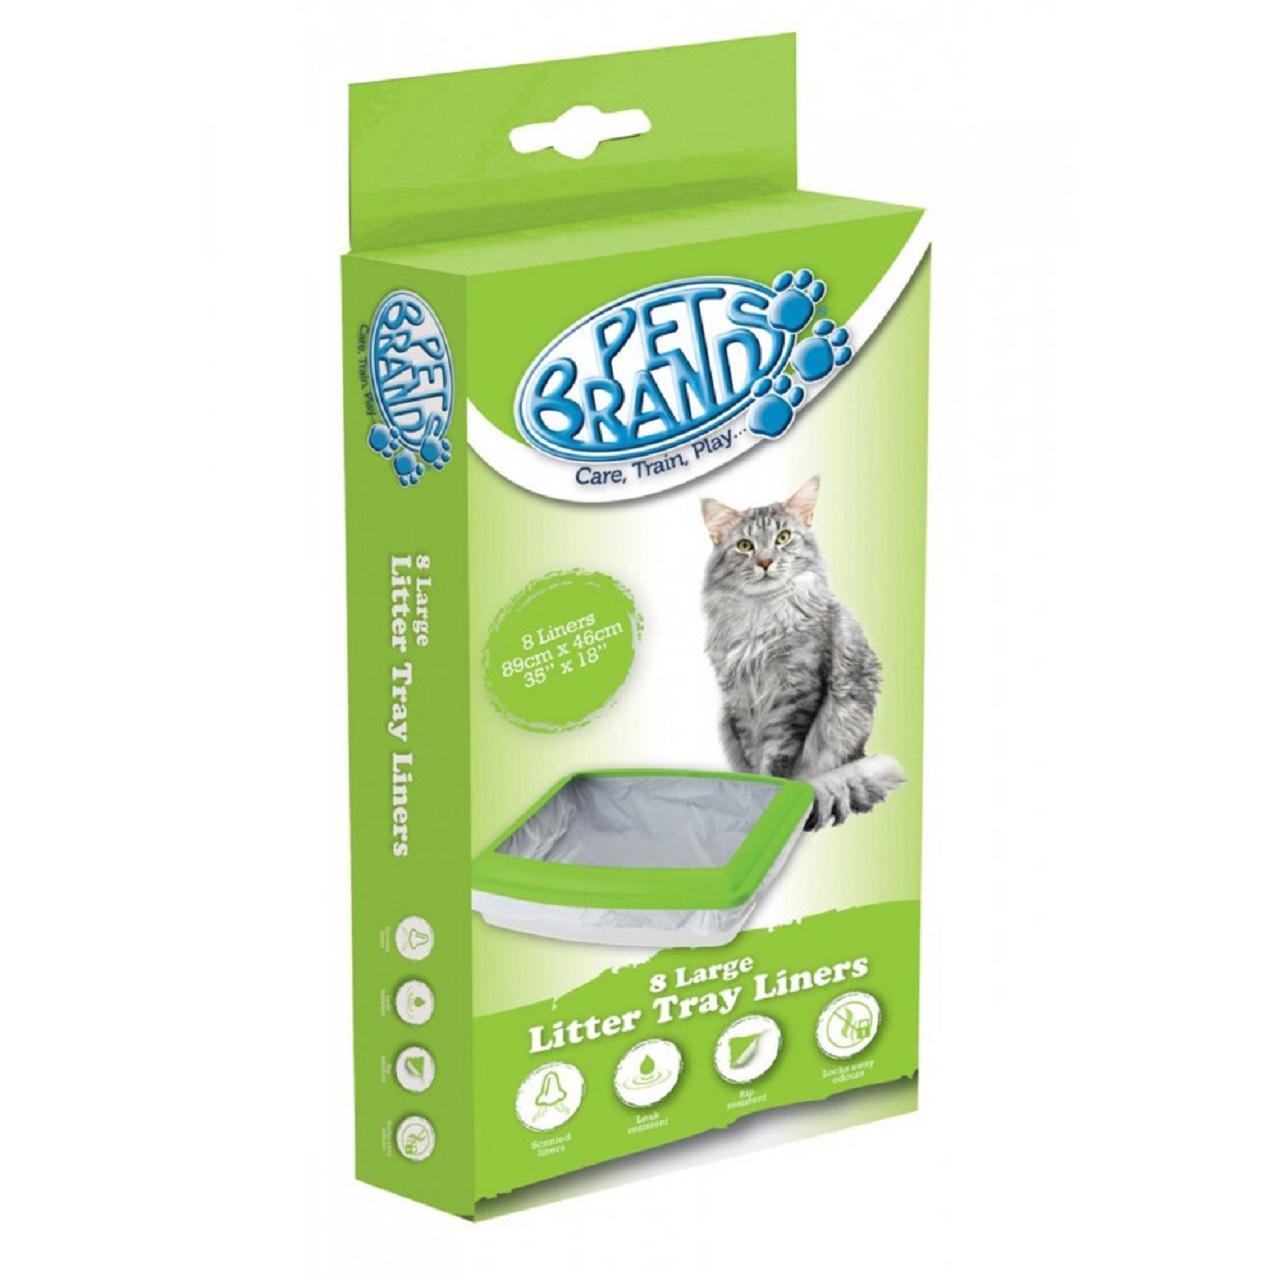 An image of Pet Brands Cat Litter Liners Large